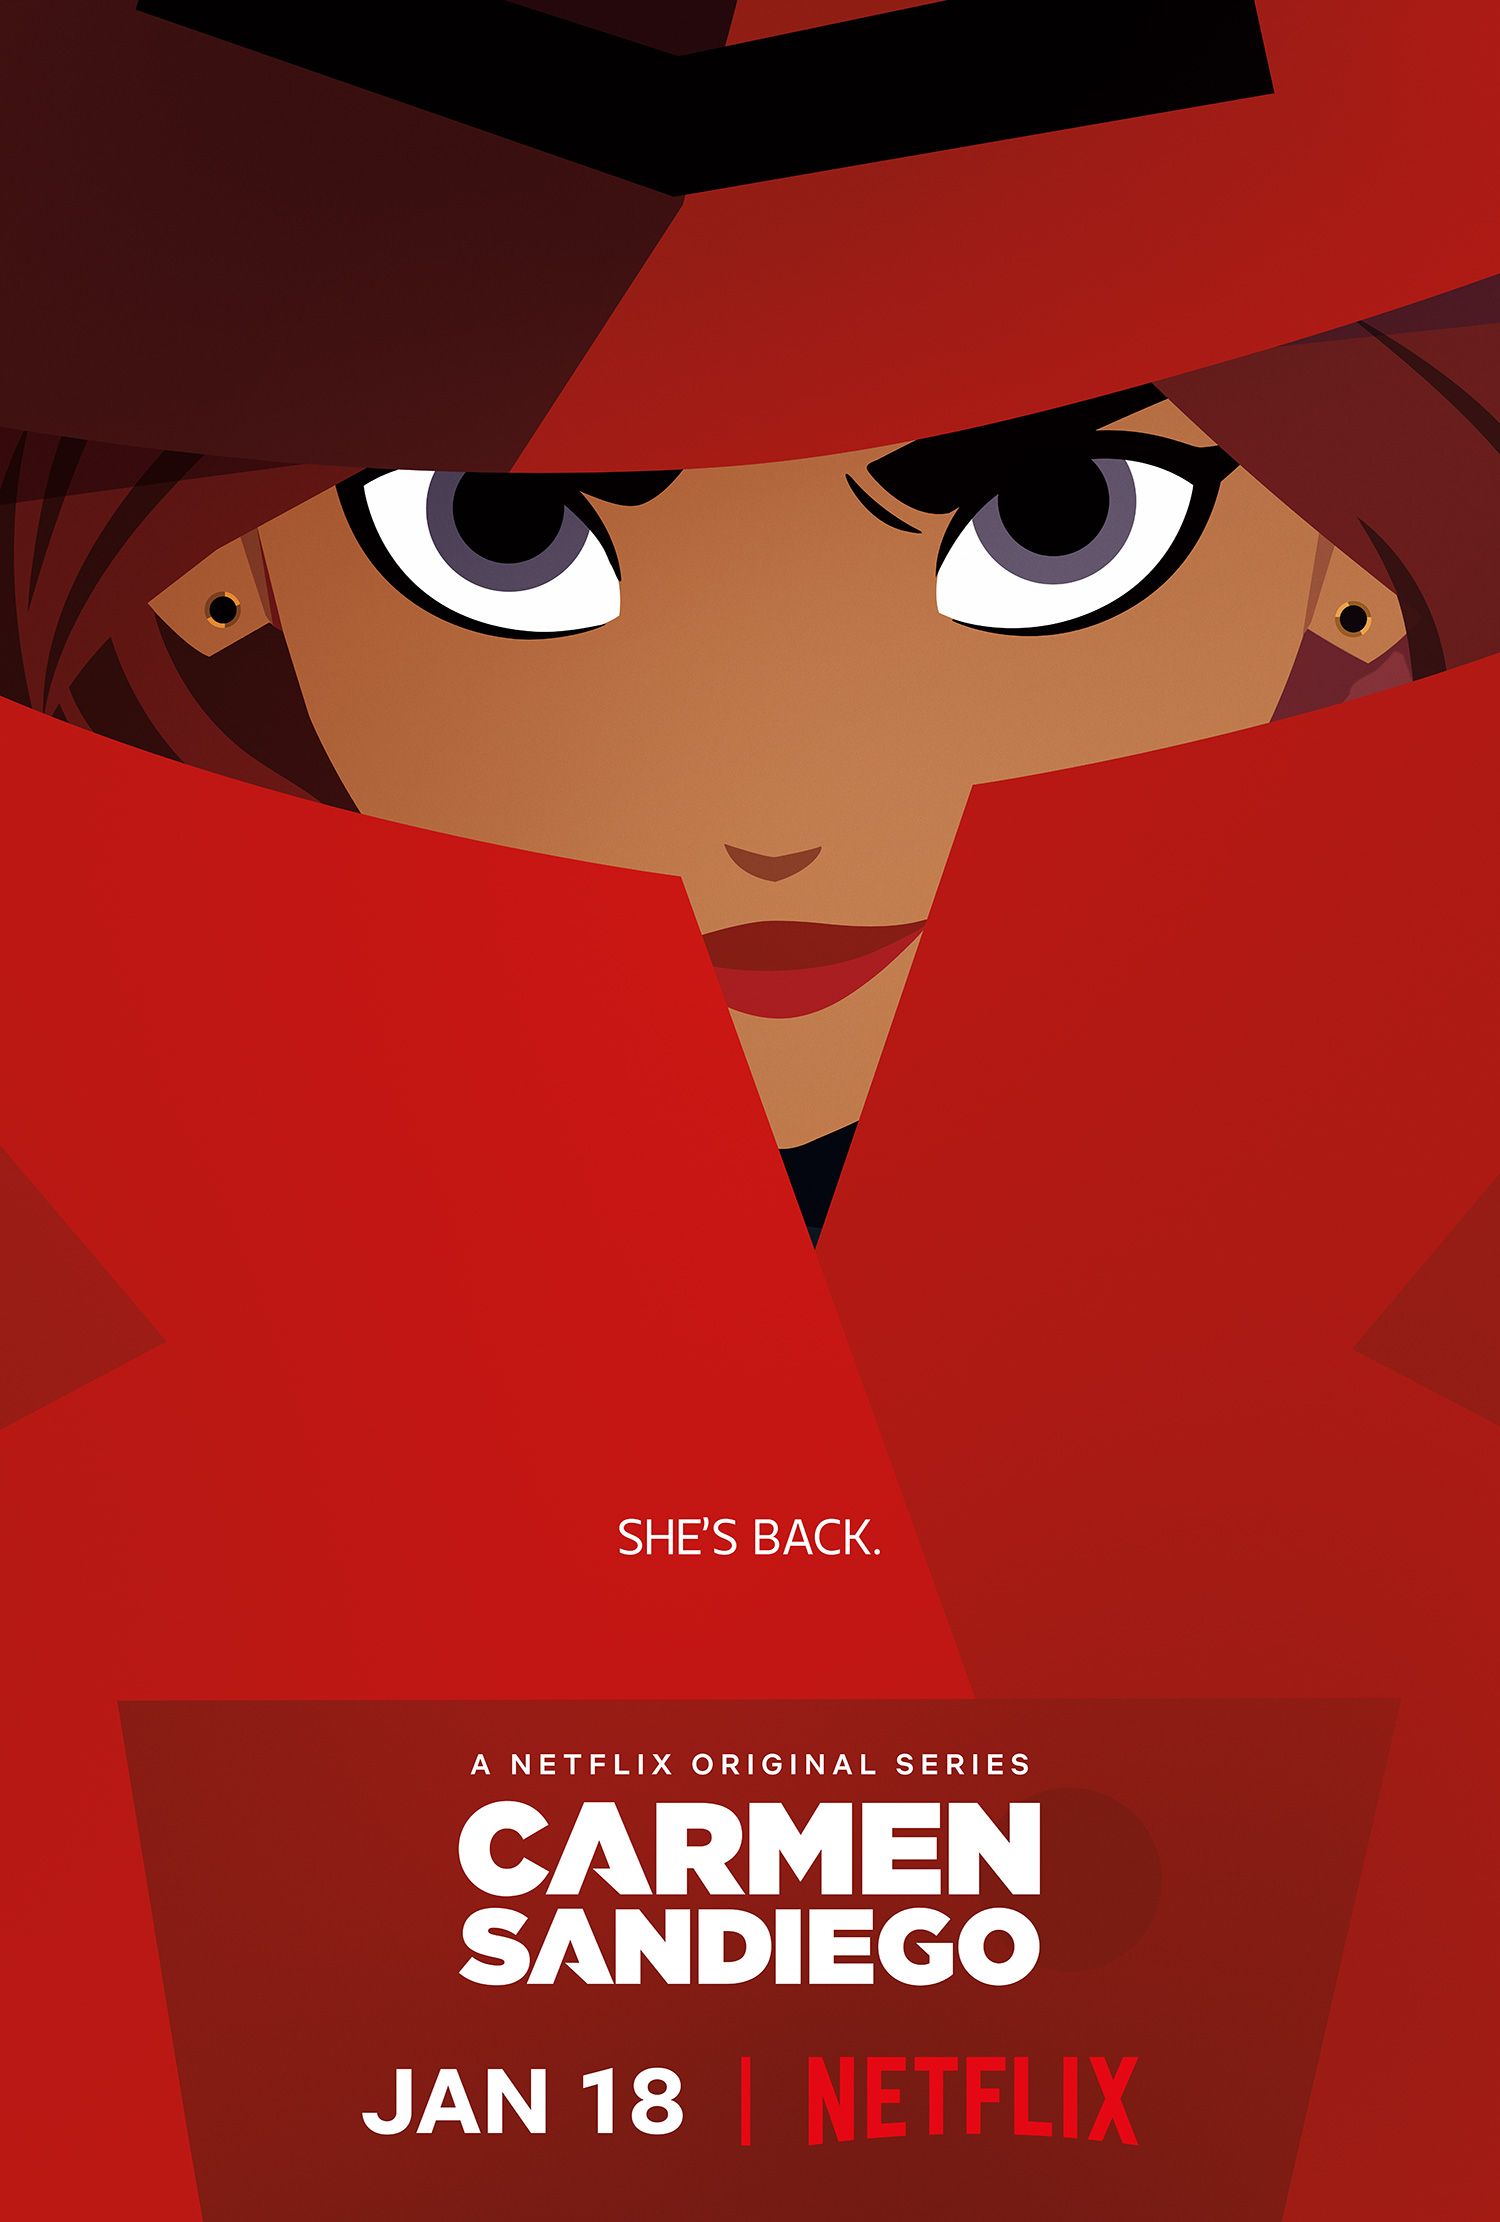 Carmen Sandiego Review: Fashion over Facts in the New Netflix Series